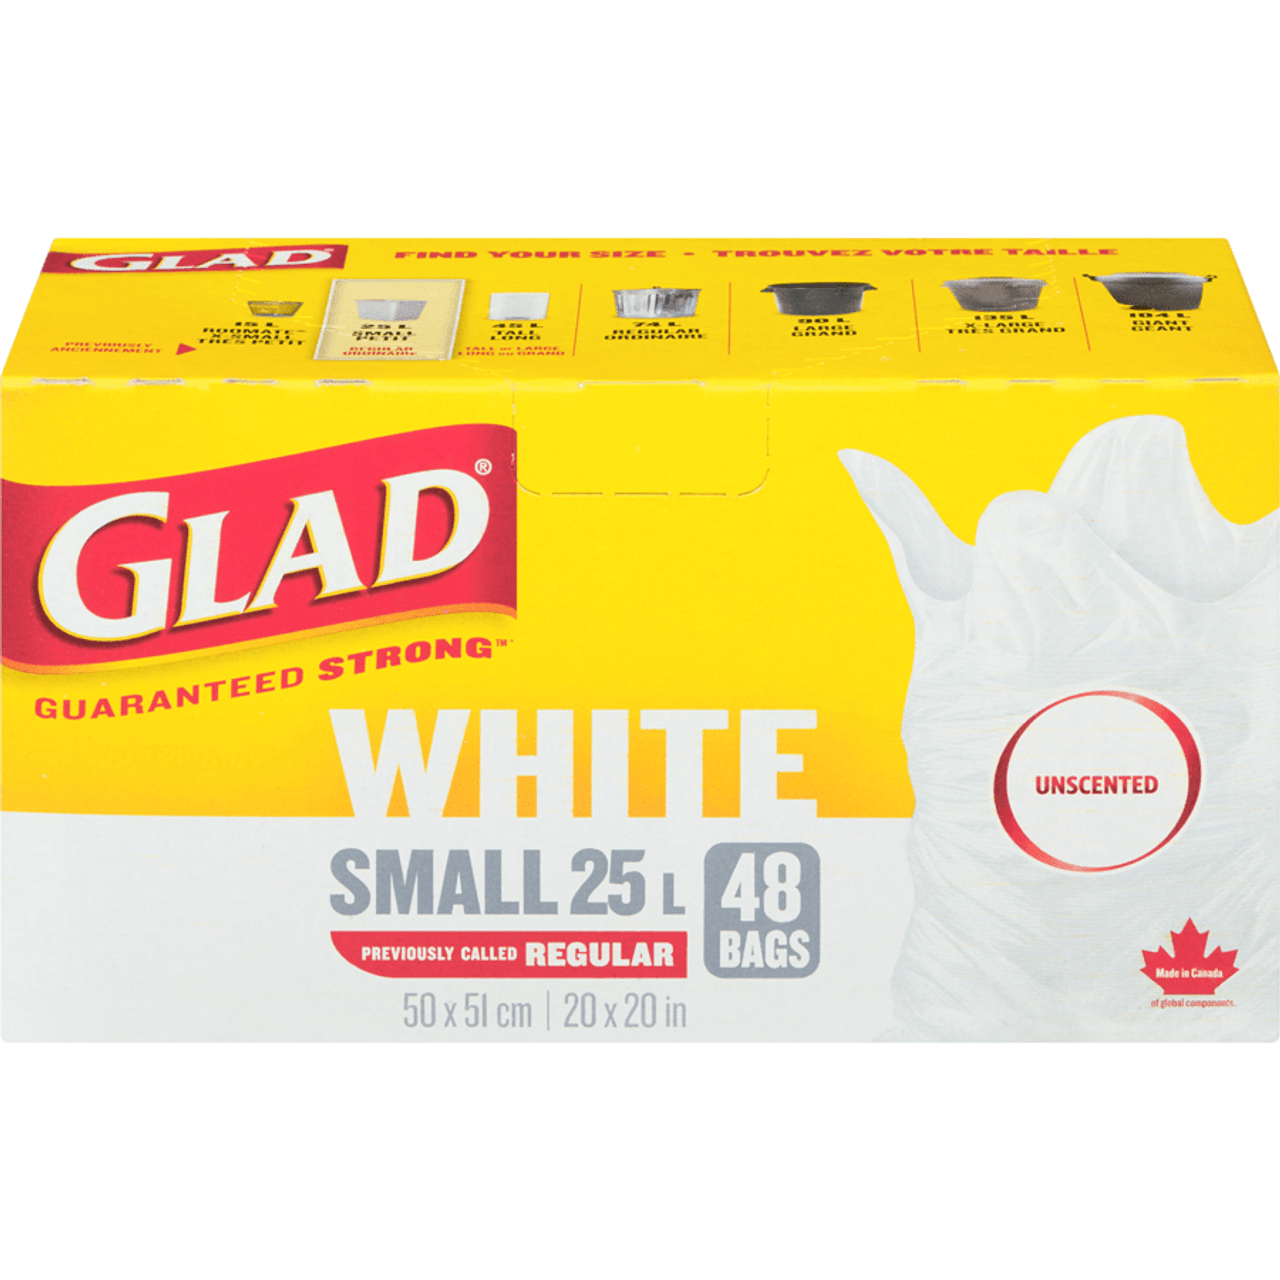 GLAD White Garbage Small 25 Litres Bags - 48 Bags(8/Case)-Chicken Pieces